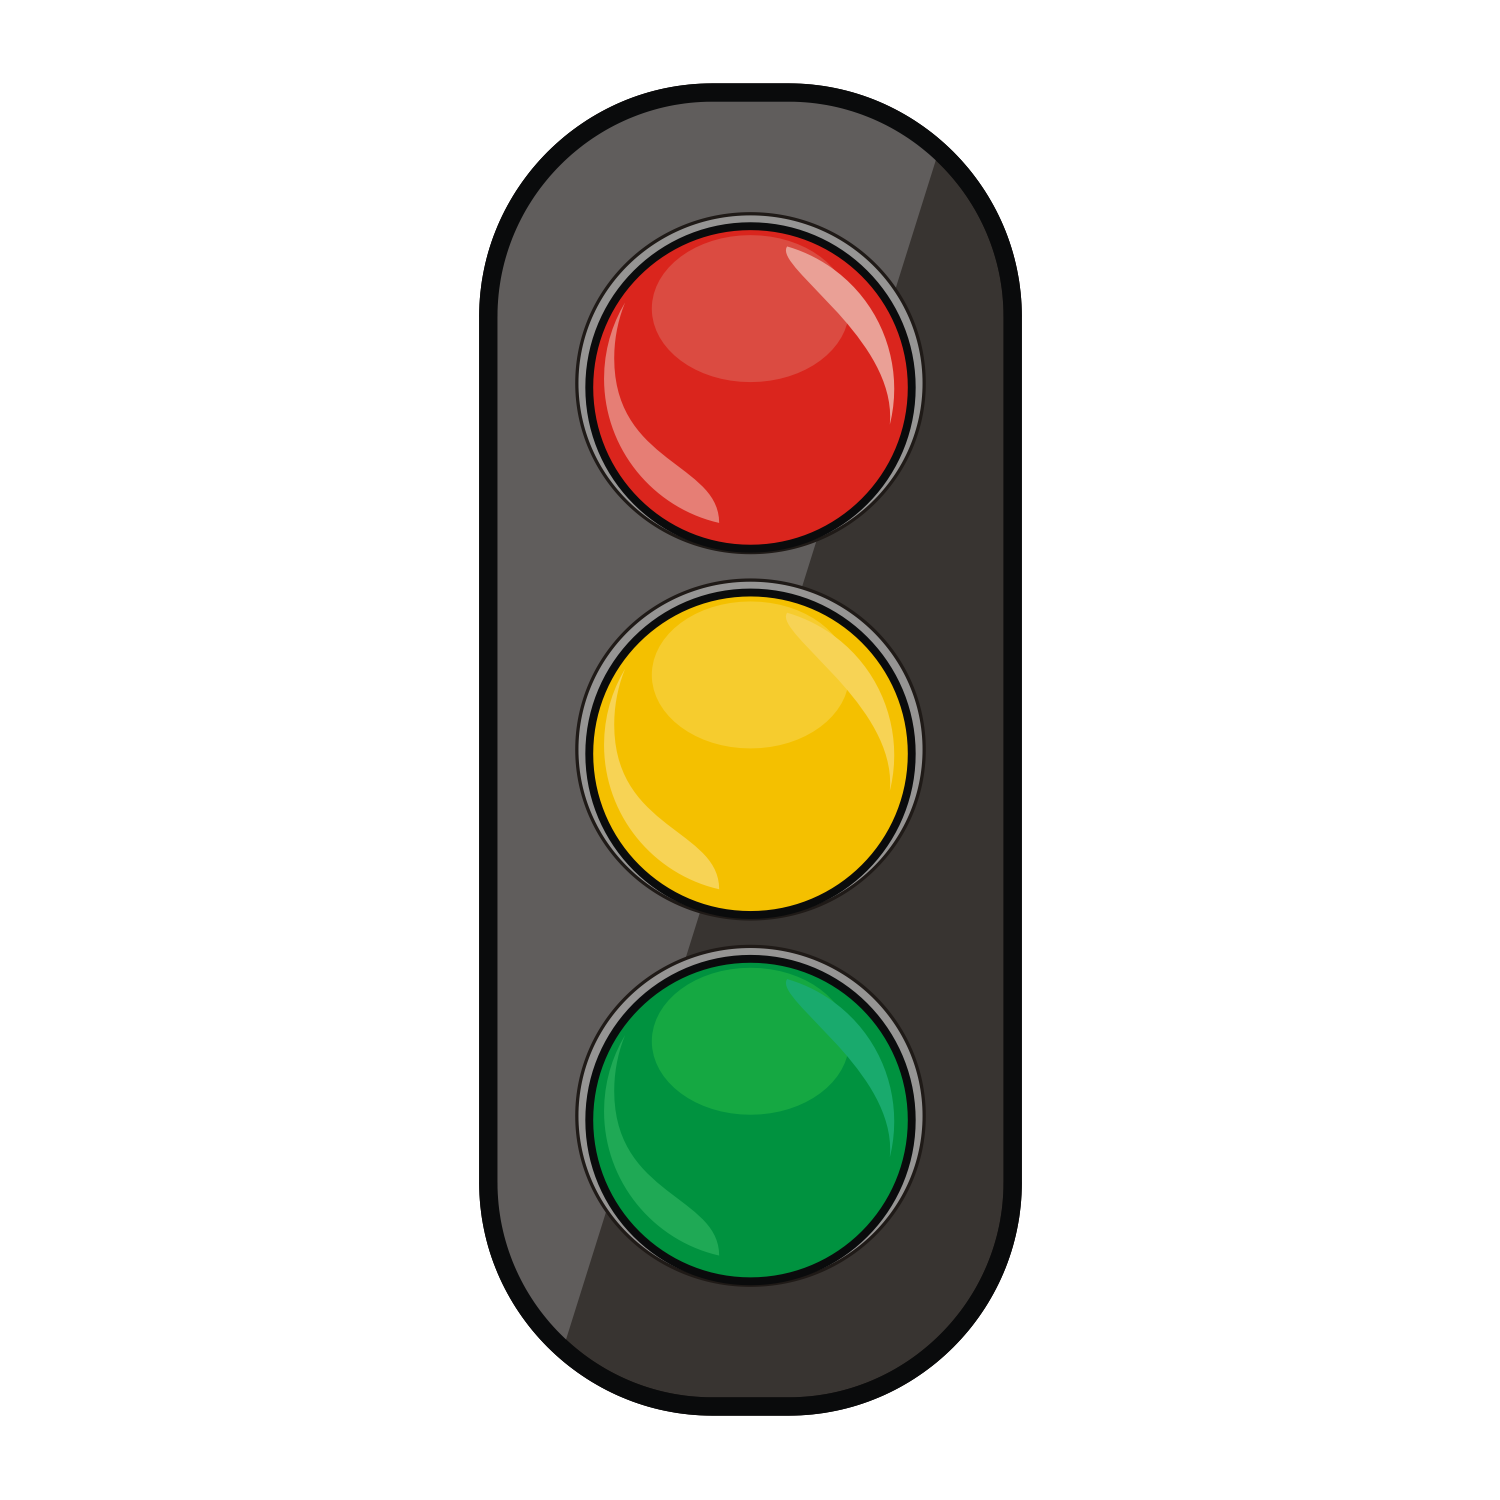 Traffic Signal Images Clipart Best